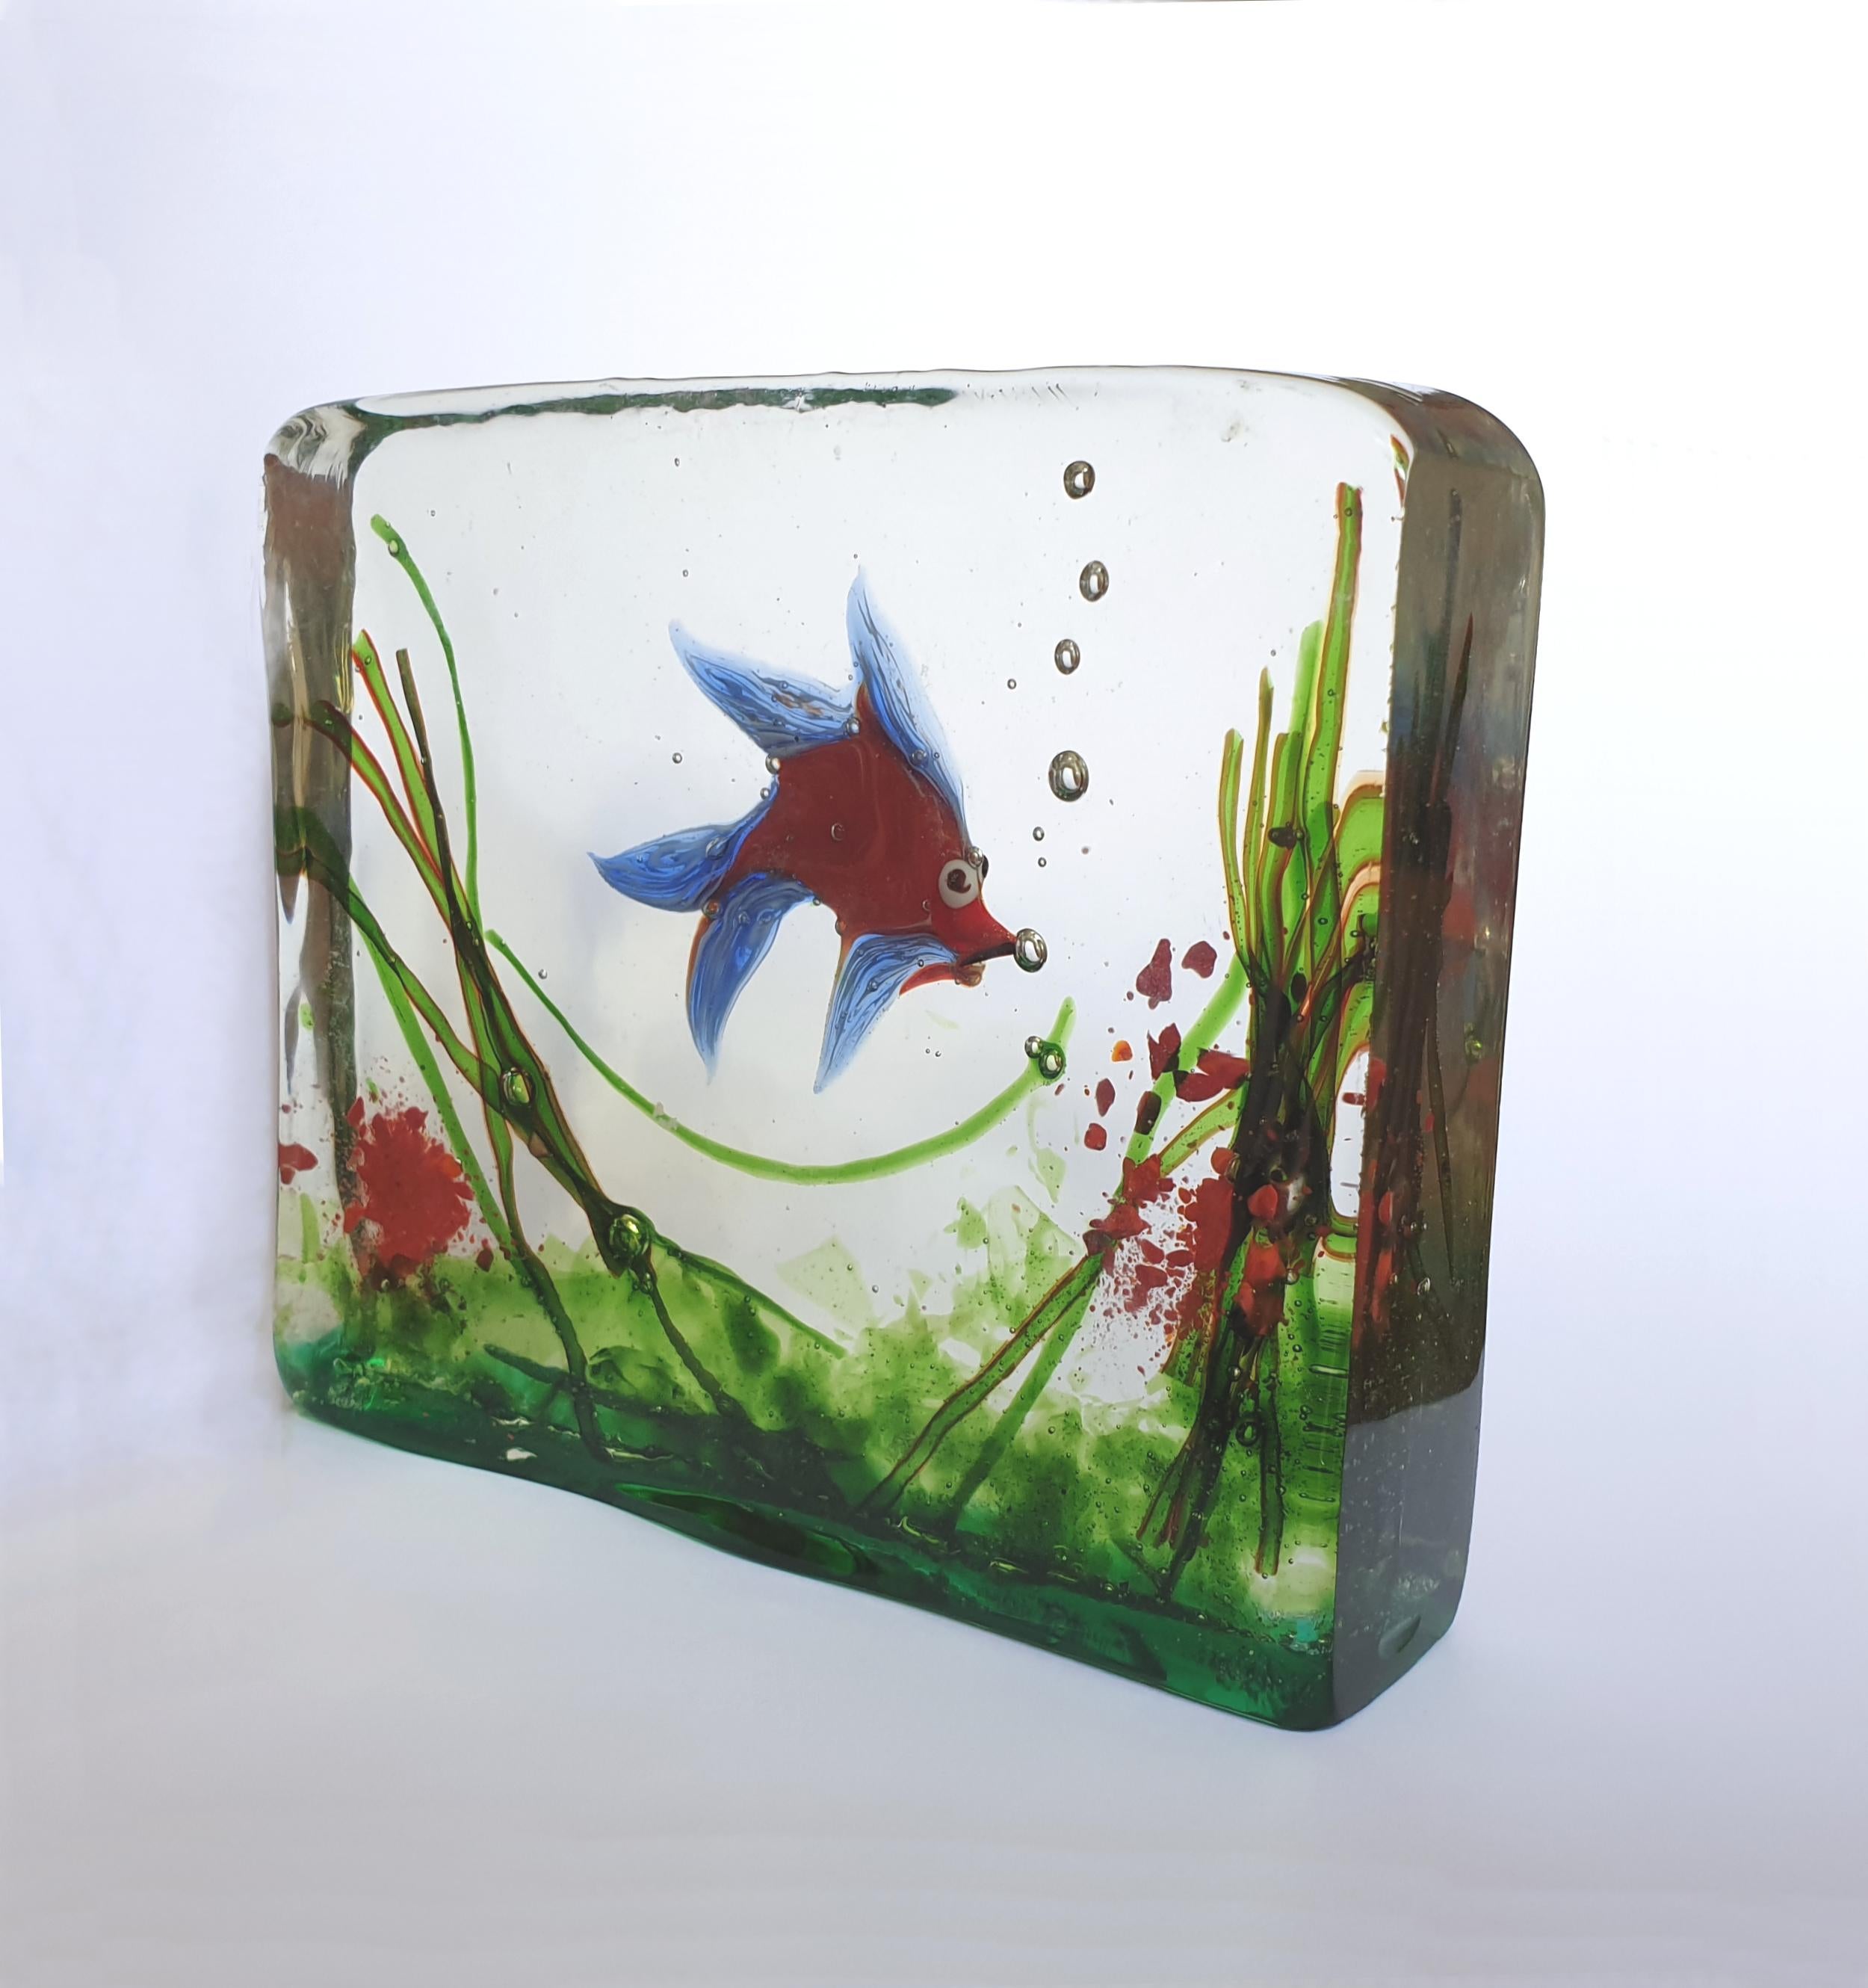 Wonderful sculpture of an aquarium tank with a red and blue fish and sea plants, with highly artistic details in blown Murano glass. Attributed to the artist Alfredo Barbini for Cenedese company. A perfect addition for decorating a midcentury living